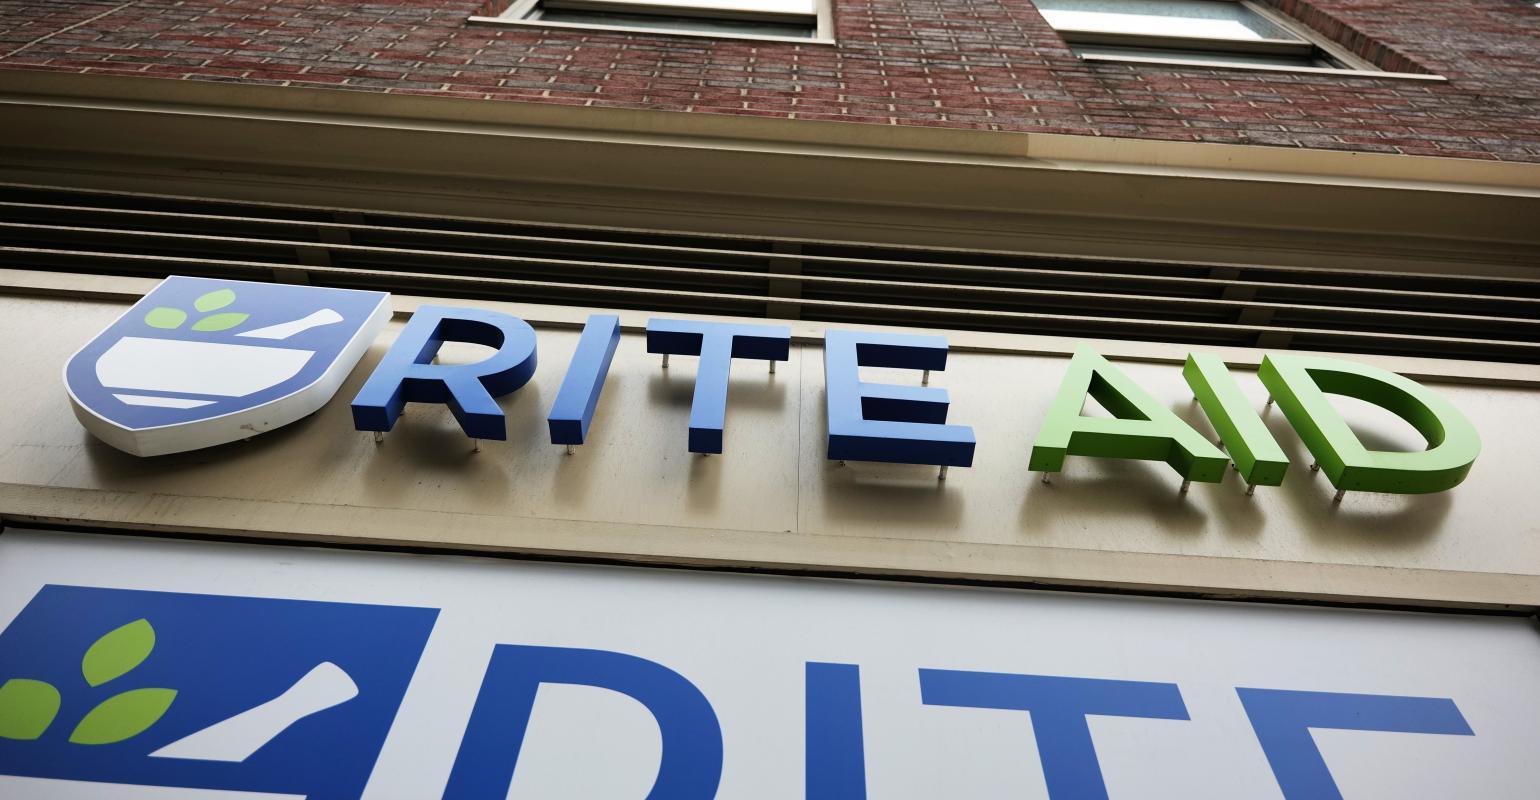 Rite Aid files for bankruptcy faced with high debt, opioid lawsuits